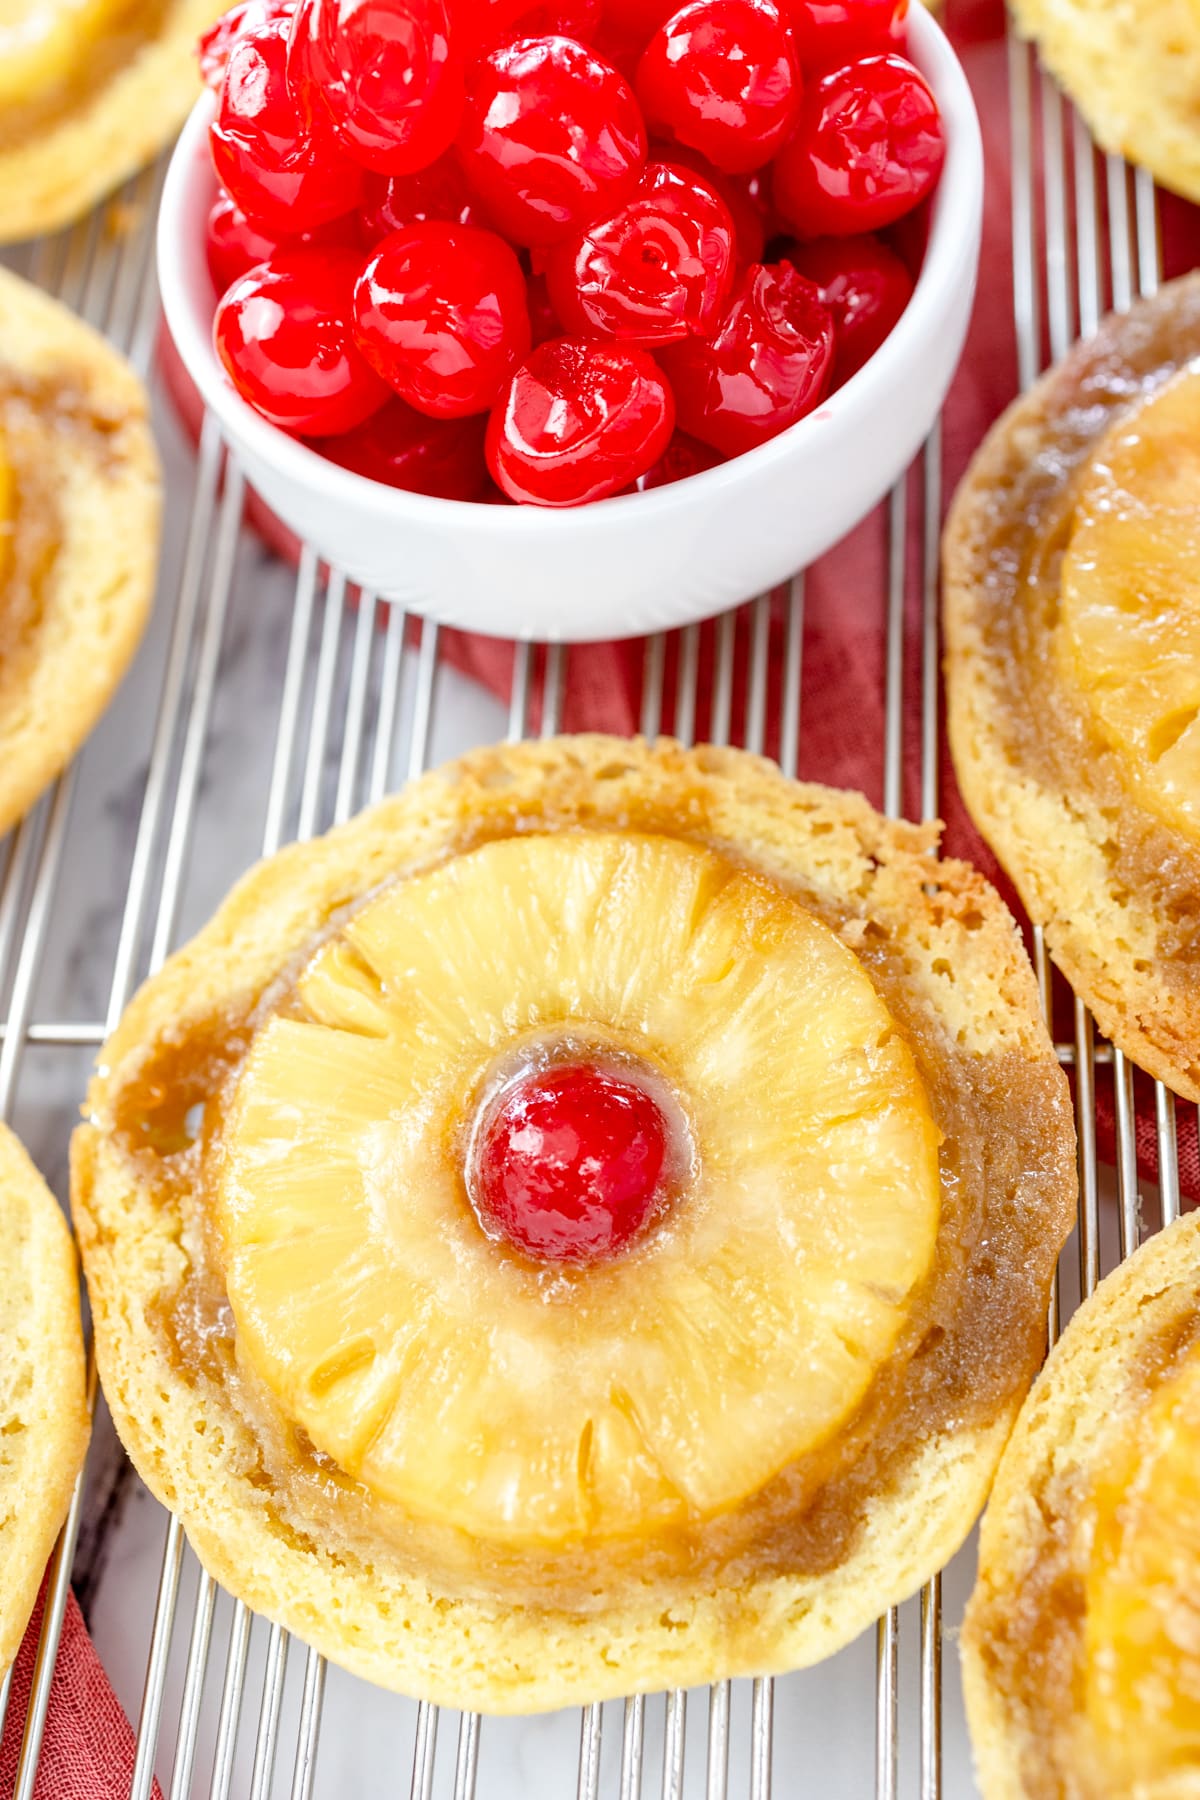 Top view of Pineapple Upside Down Cookies on a wire rack with a small bowl of maraschino cherries in it.